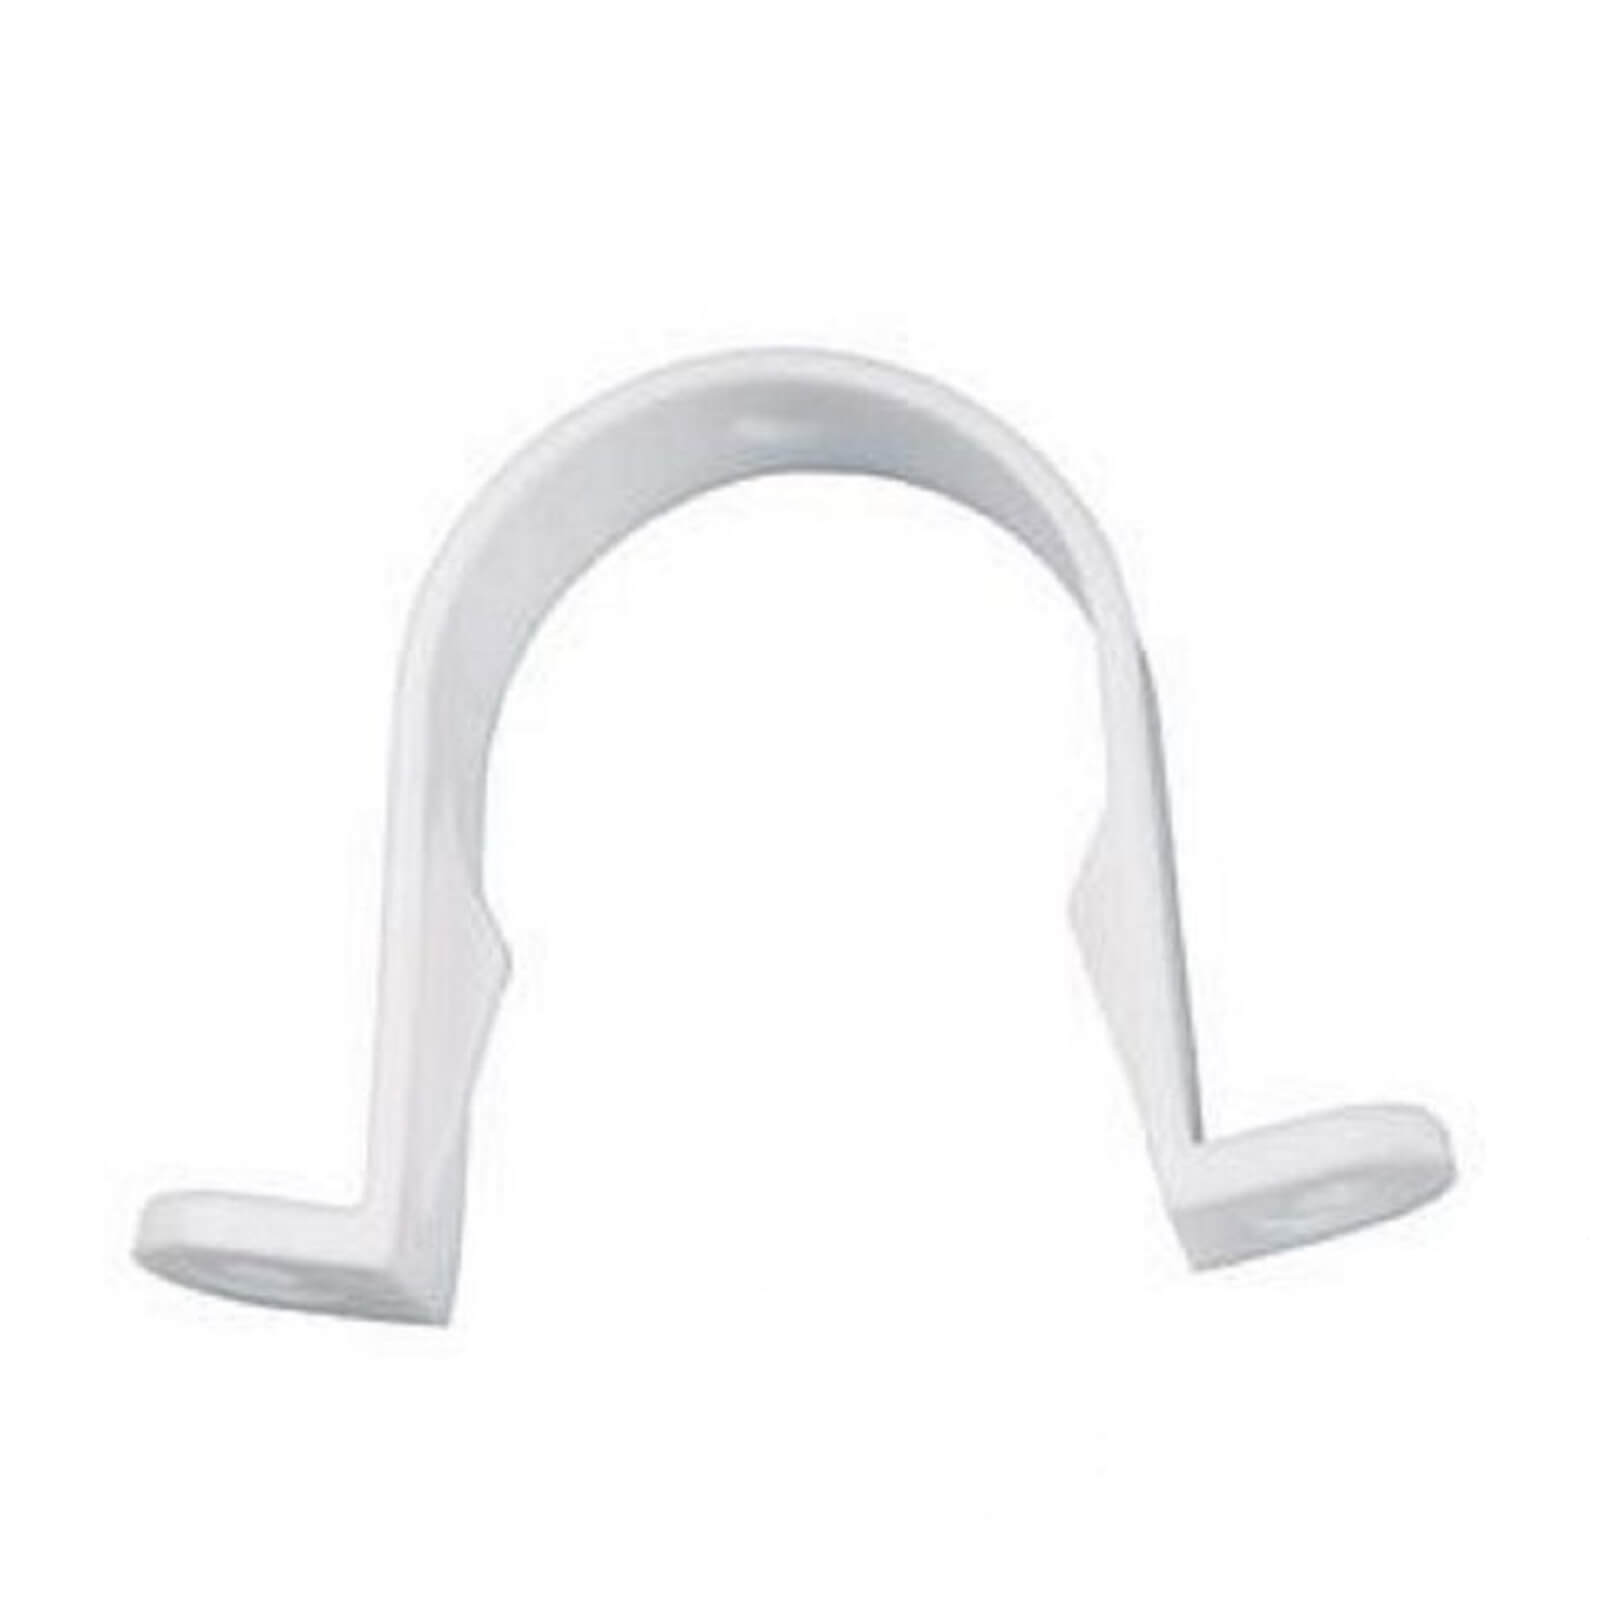 Photo of Waste Pipeclip - 40mm - White